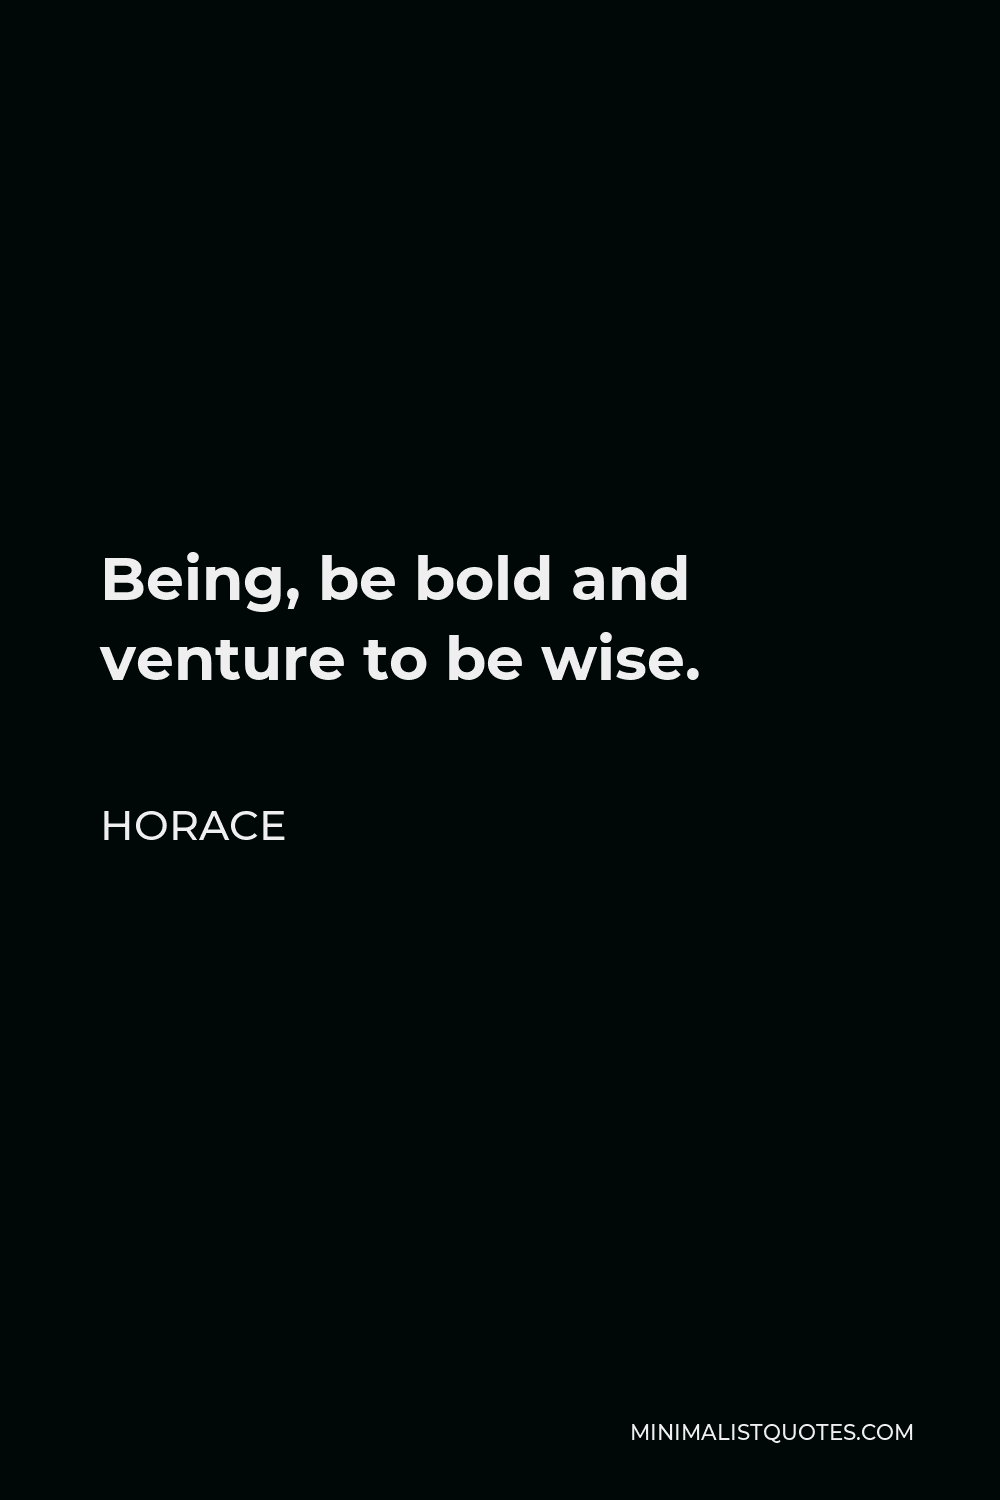 Horace Quote - Being, be bold and venture to be wise.